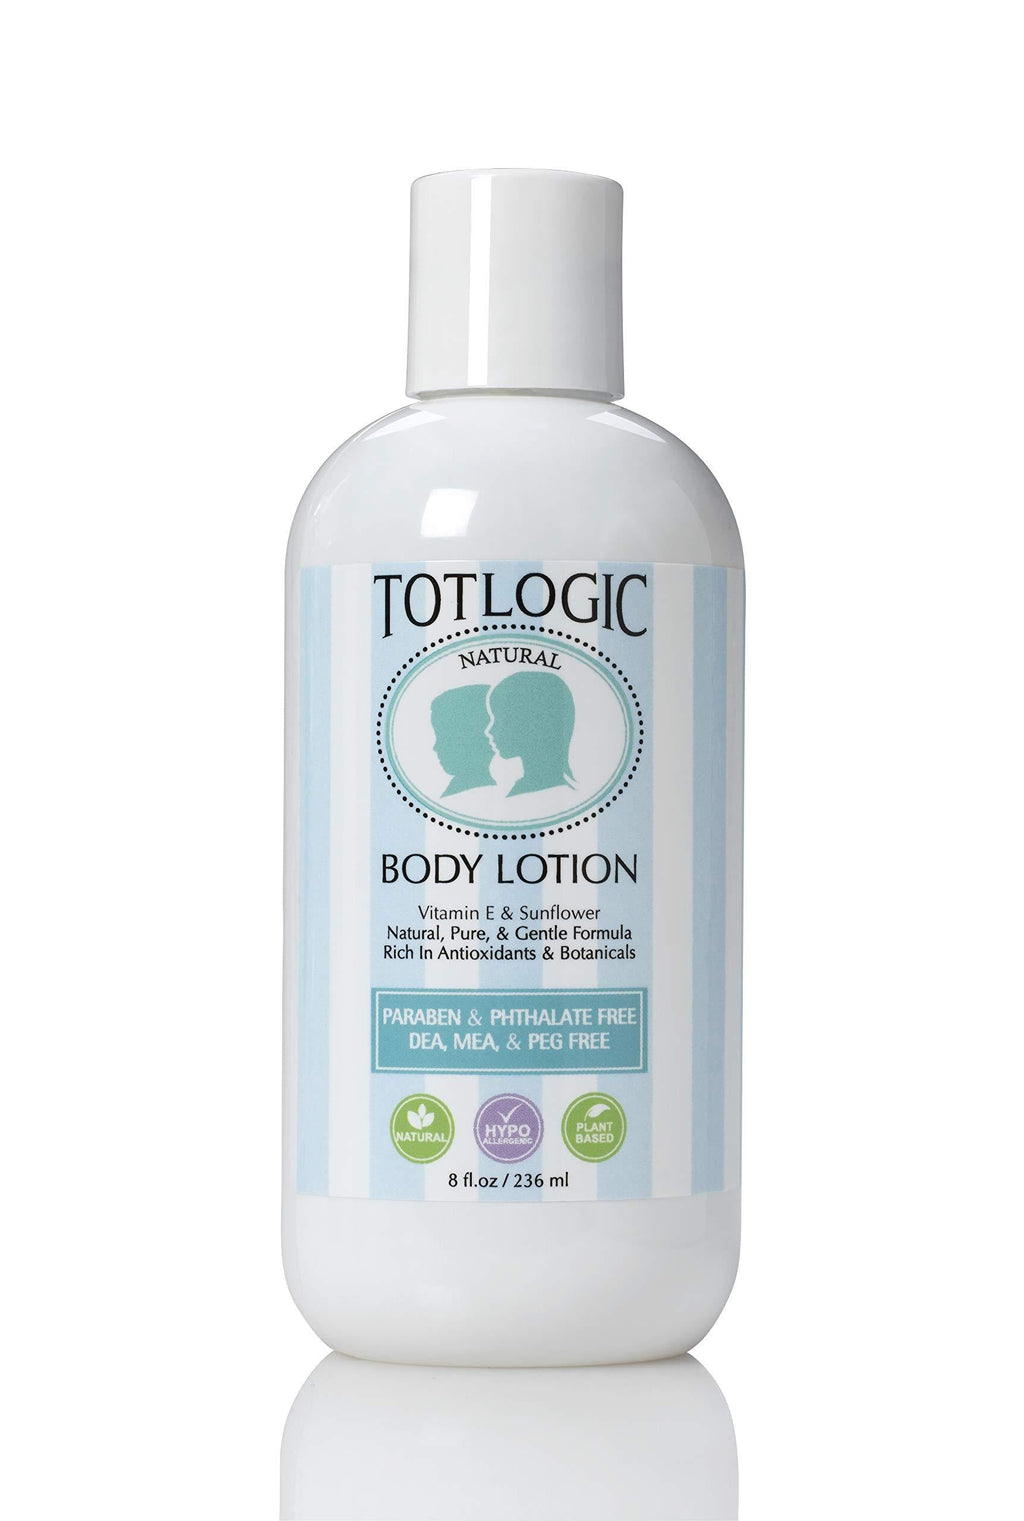 TotLogic Kids and Baby Safe Natural Body Lotion - 8 oz Original - Scented with Essential Oils - Plant Based Formula for Dry Skin - BeesActive Australia